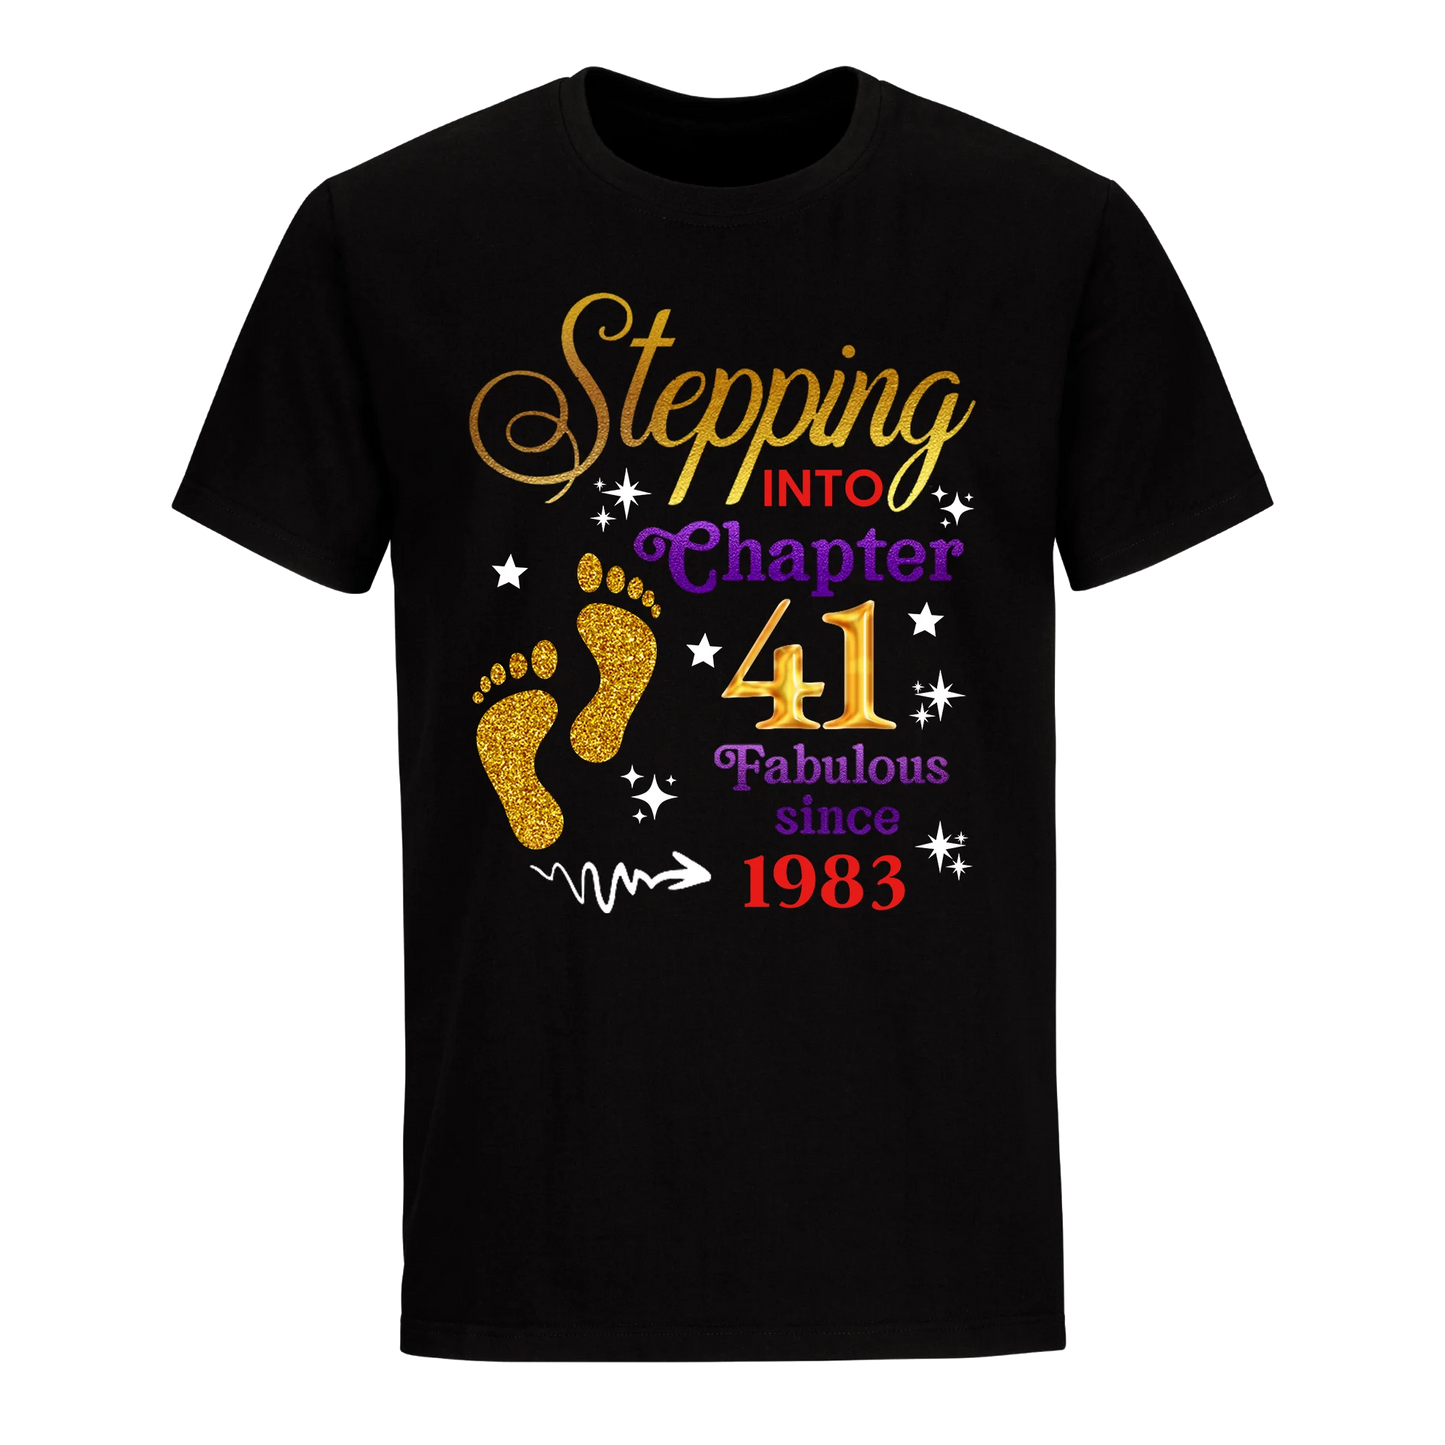 STEPPING INTO MY 41st 1983 UNISEX SHIRT